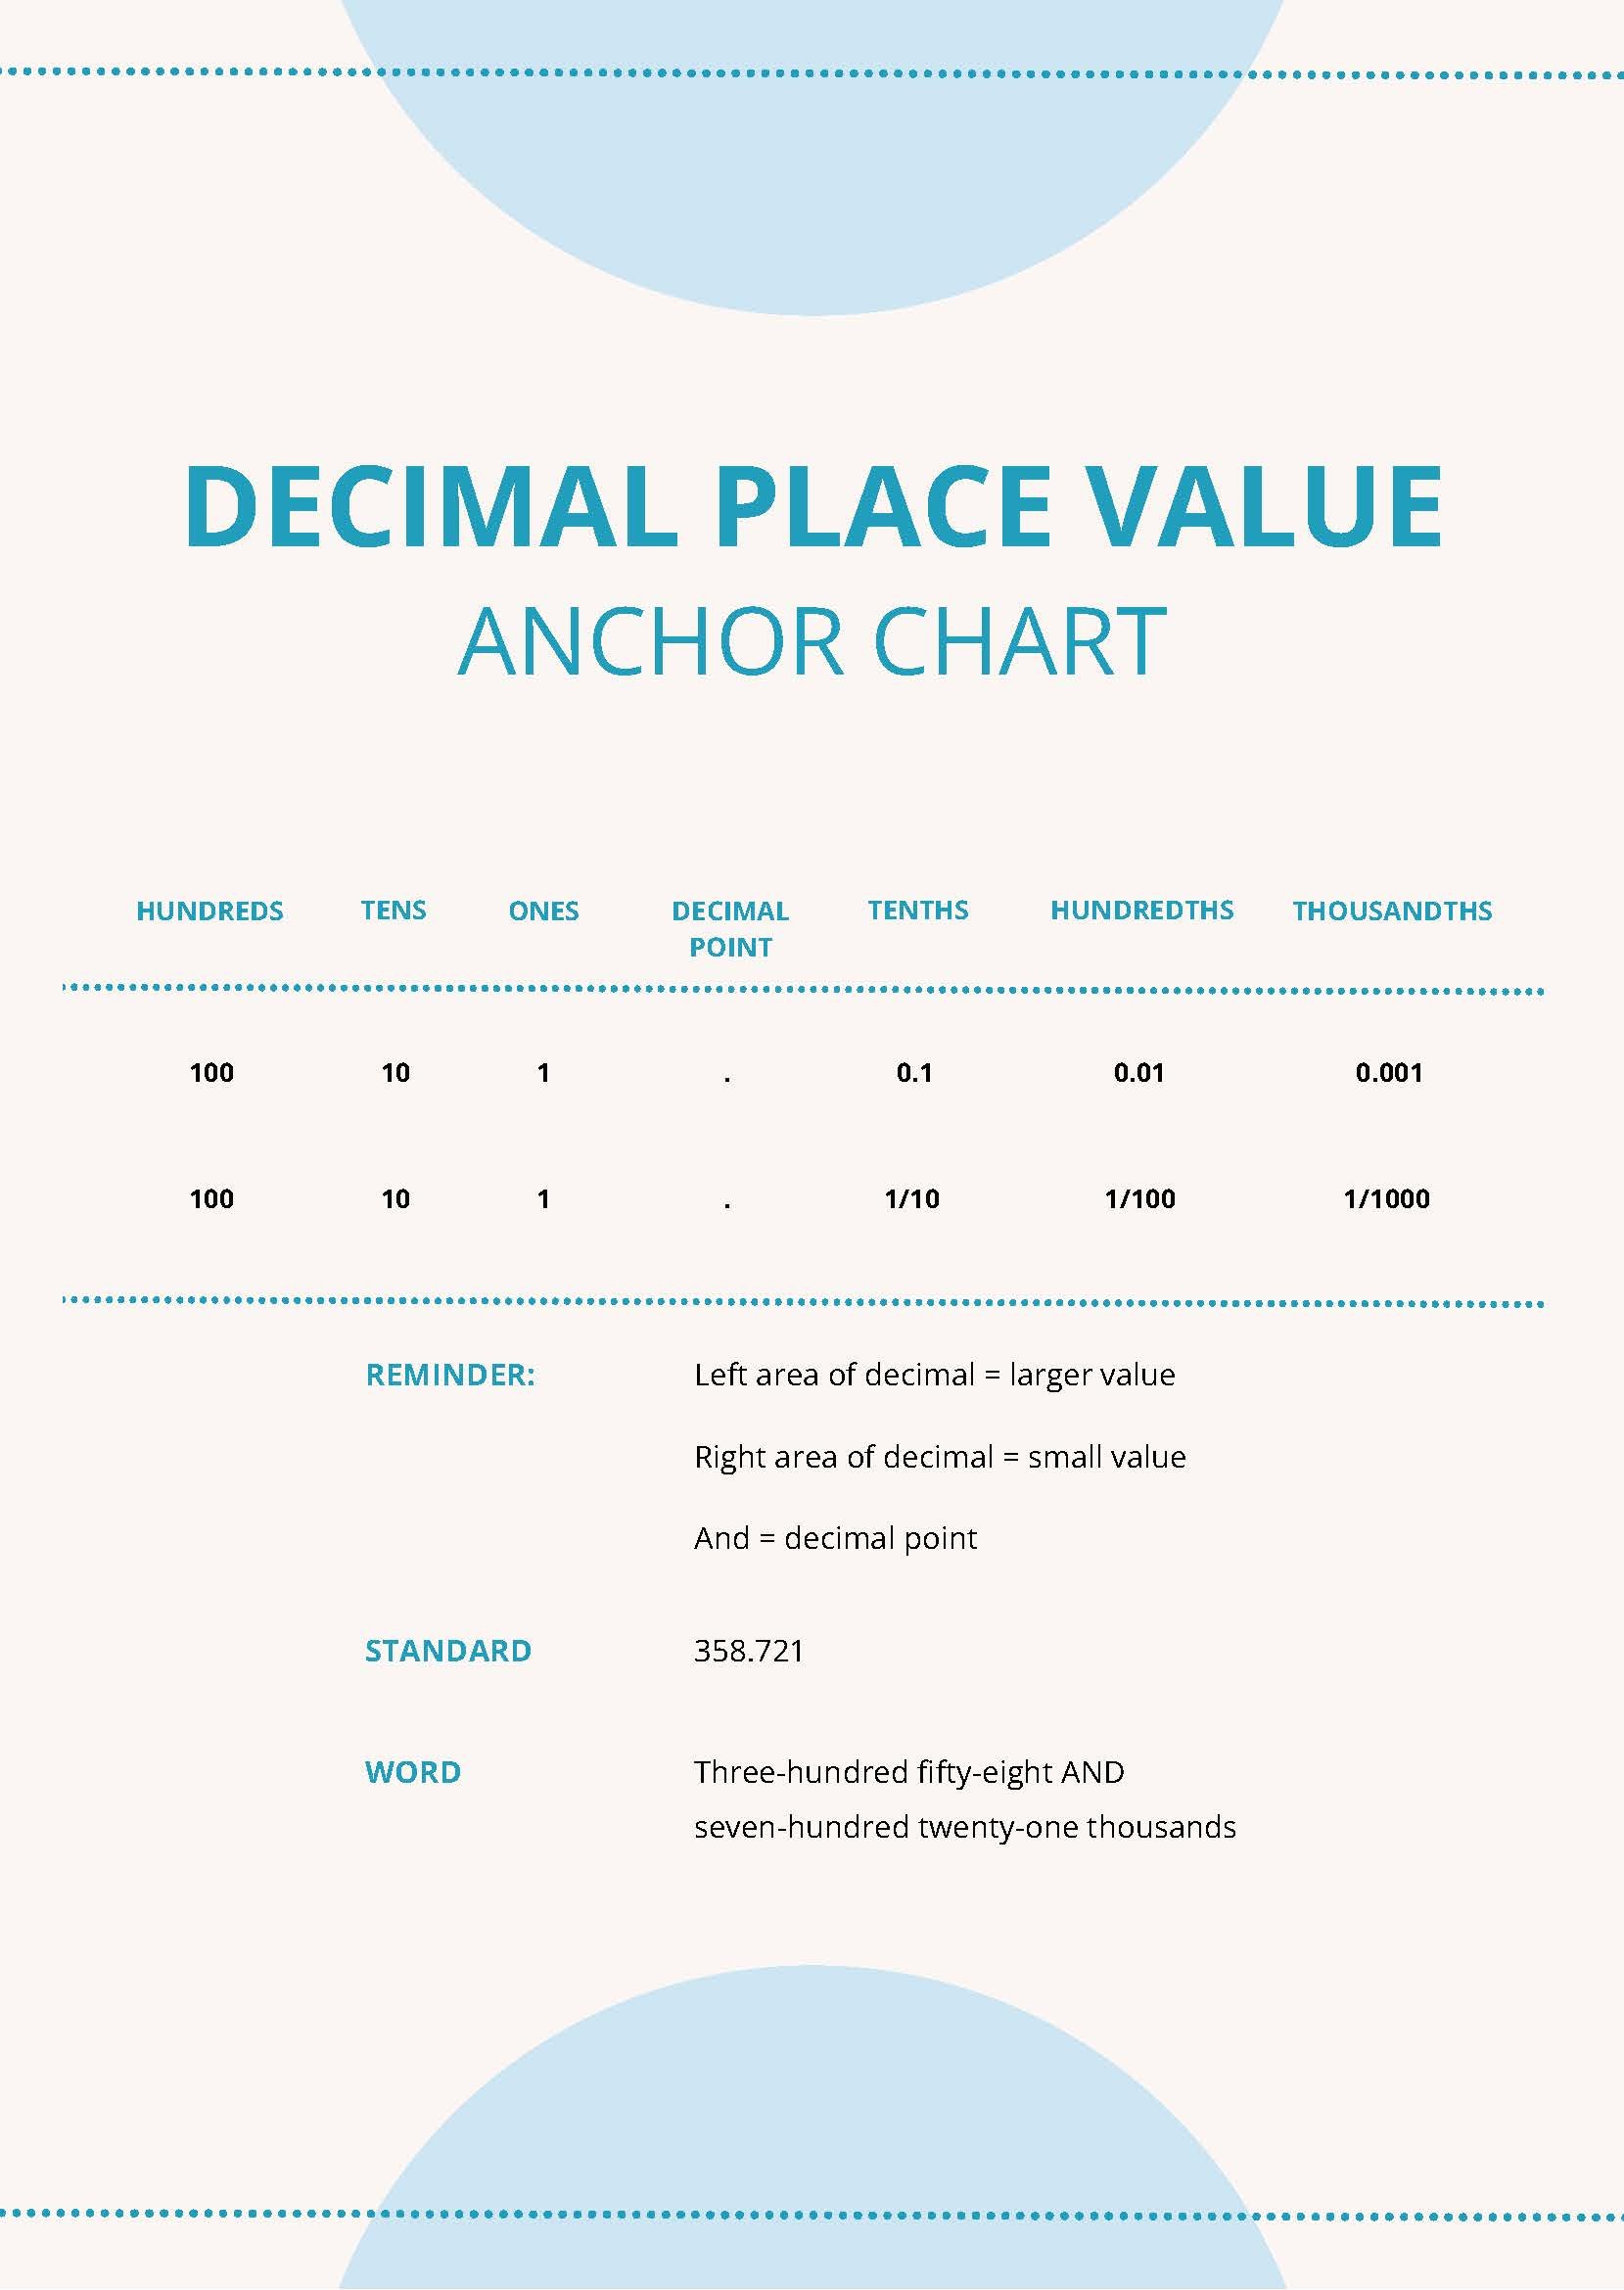 Decimal Place Value Anchor Chart in PDF